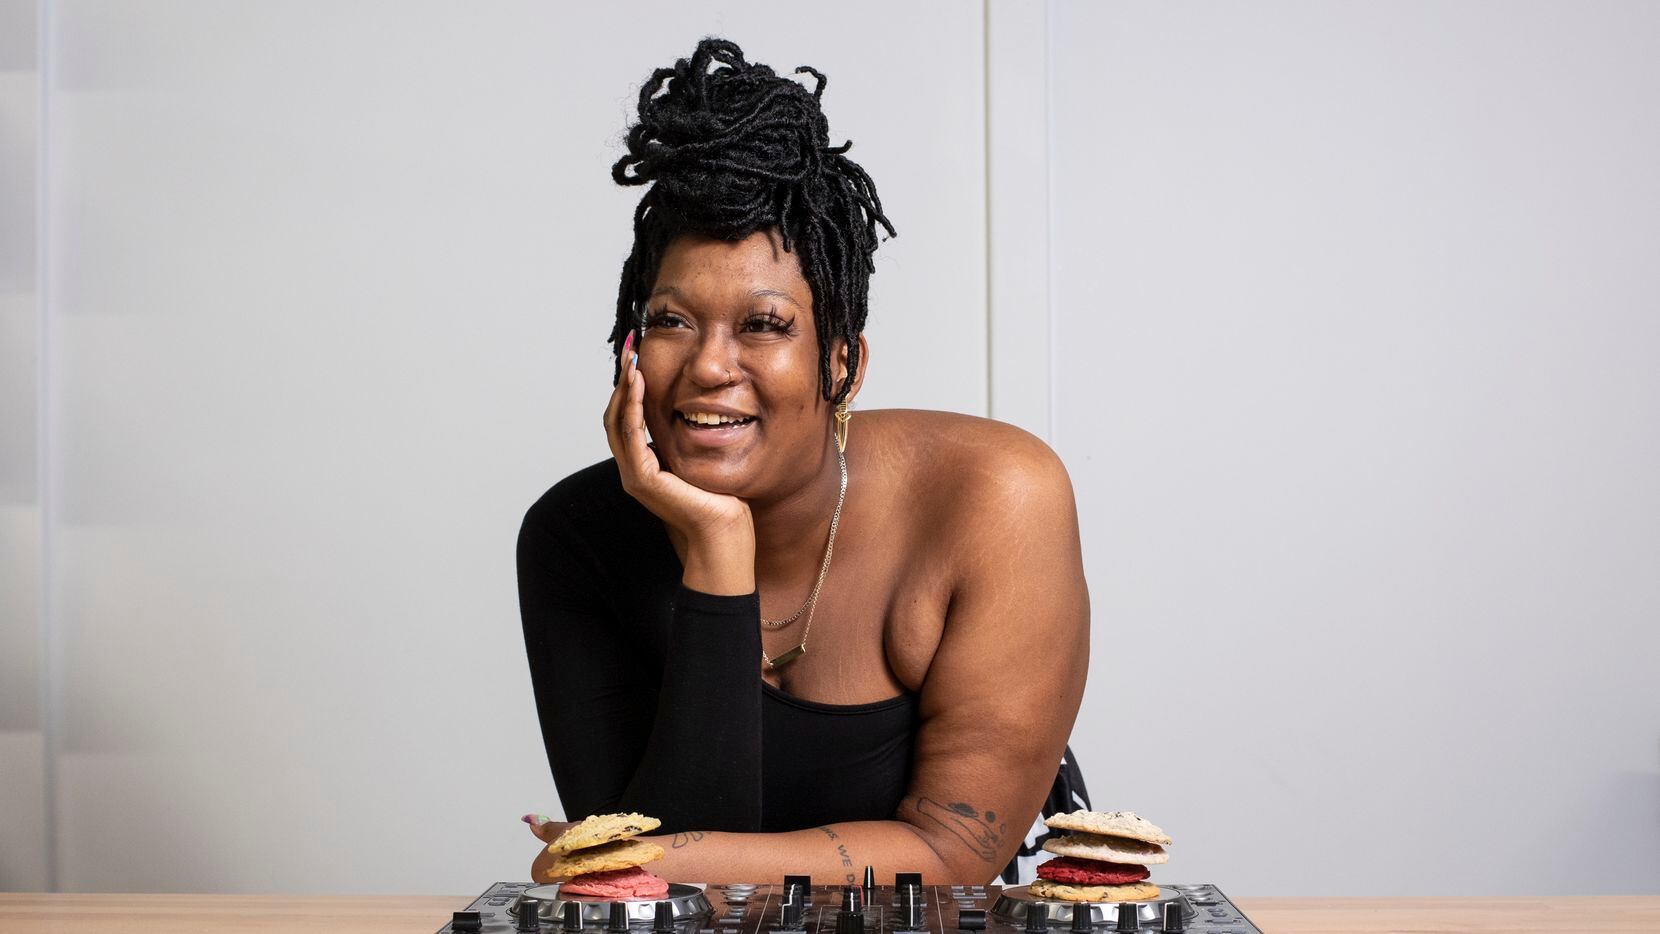 Rachel Harvey, also known as DJ Ursa Minor, with some of the cookies she bakes under as the Butter Fairy, photographed at Tyler Station in Dallas, on Monday, Oct. 19, 2020. Harvey is known for selling her cookies out of a Super Mario Bros. backpack at DJ gigs.